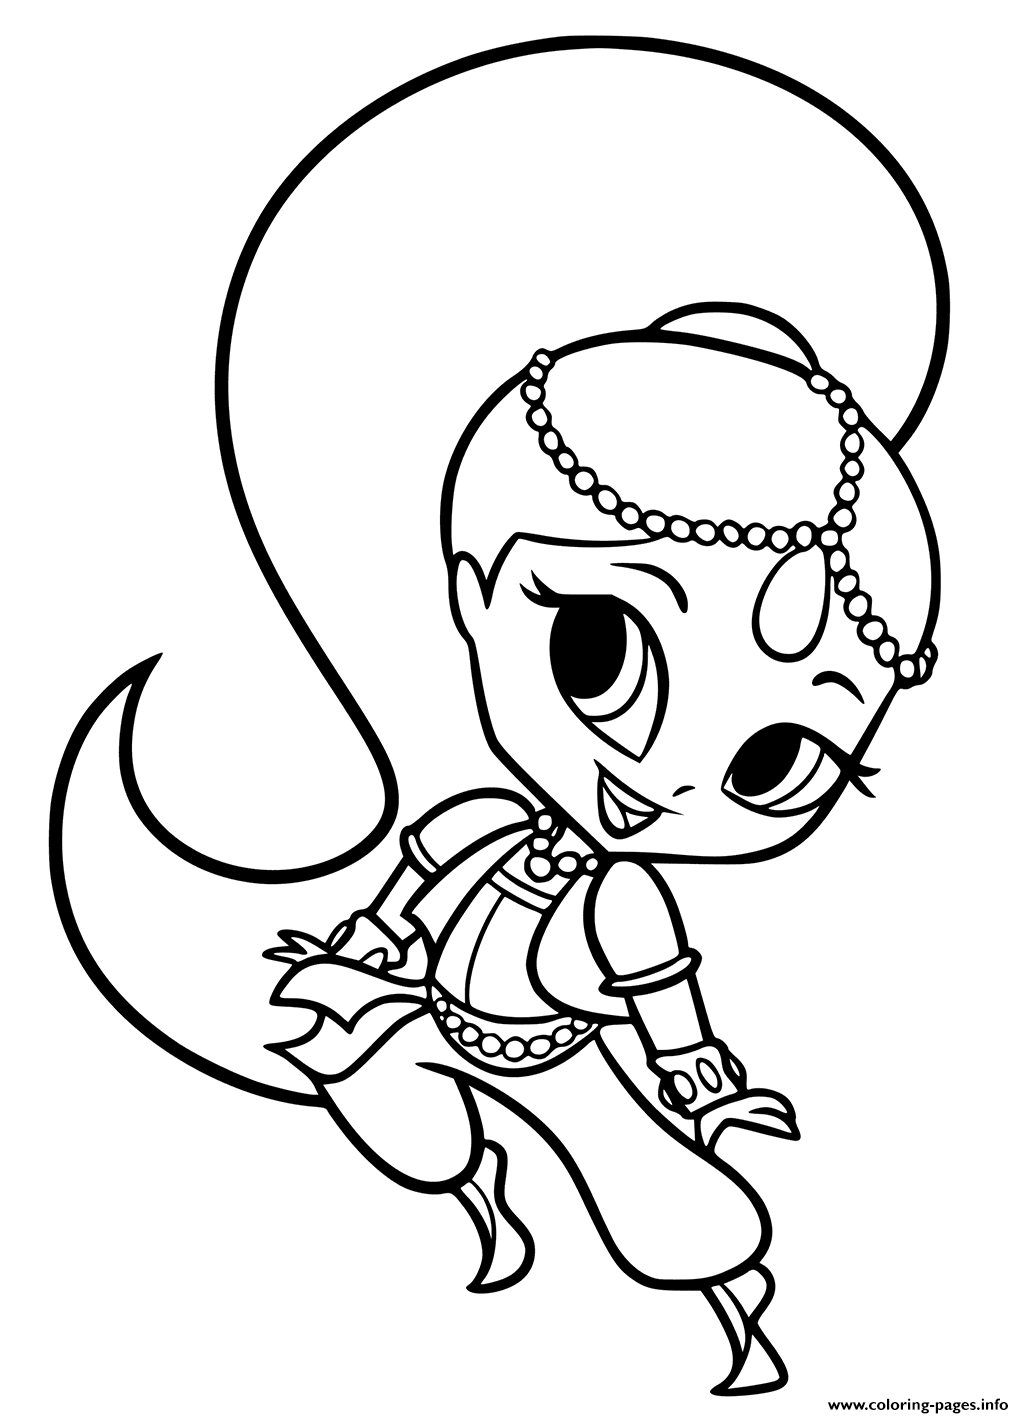 Shimmer And Shine Coloring Pages To Print Shimmer And Shine To Colour Shimmer Coloring Pages Printable